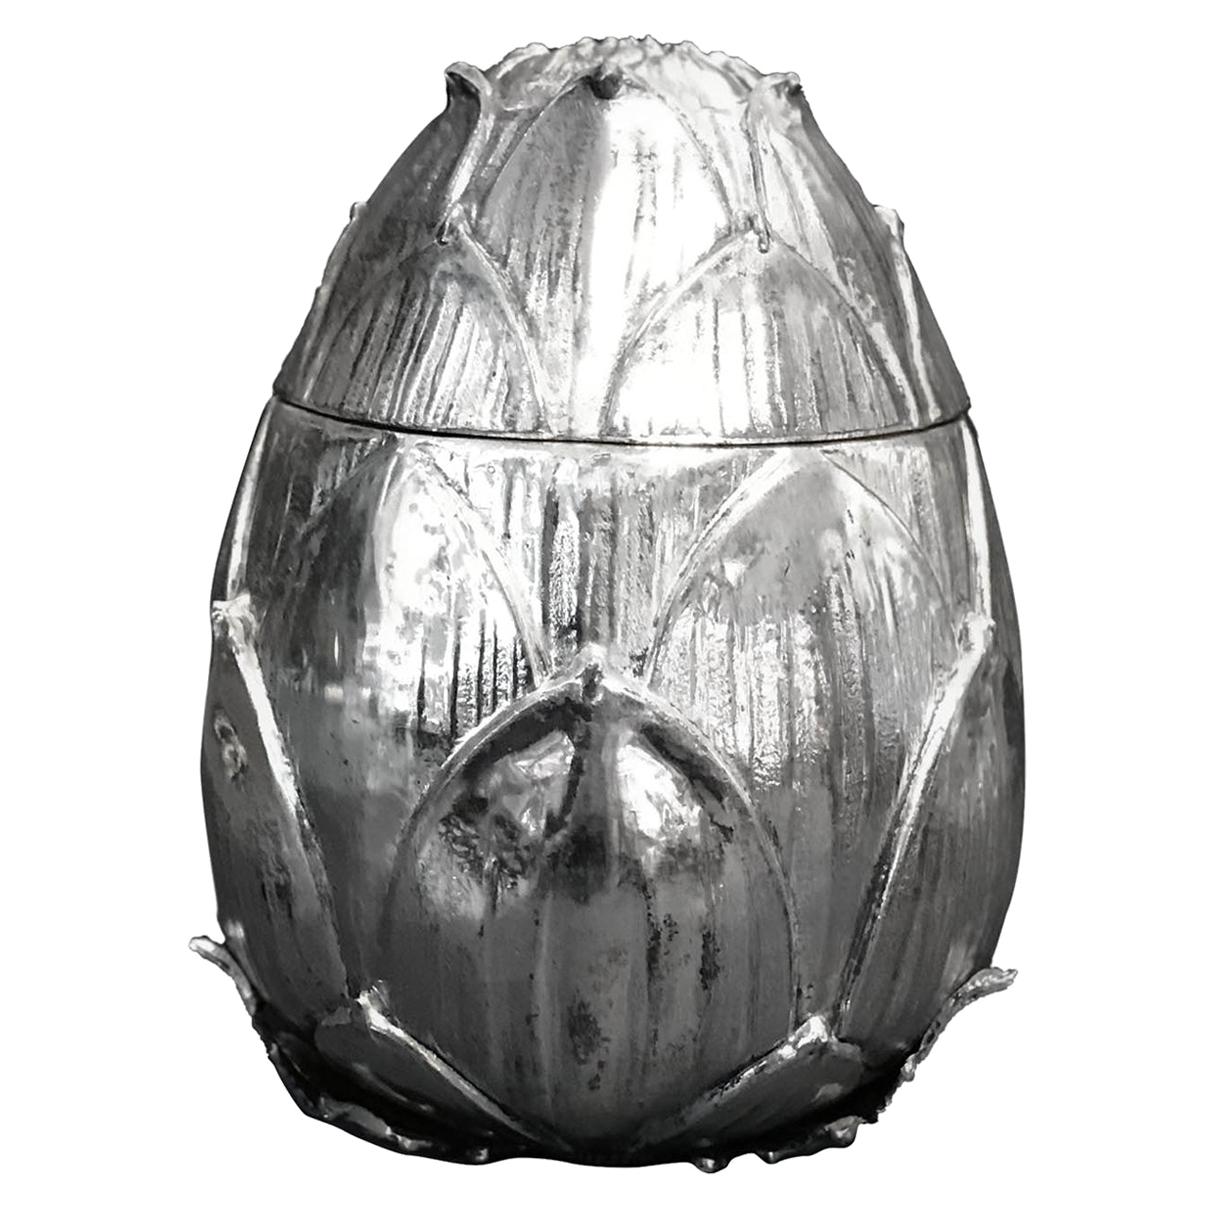 Artichoke ice bucket designed by Mauro Manetti, circa 1970 (productions realized after the 1980s have a white lacquered metallic inner part instead). Outside made of silverplated cast aluminum and a metallic inner part, typical of the production of